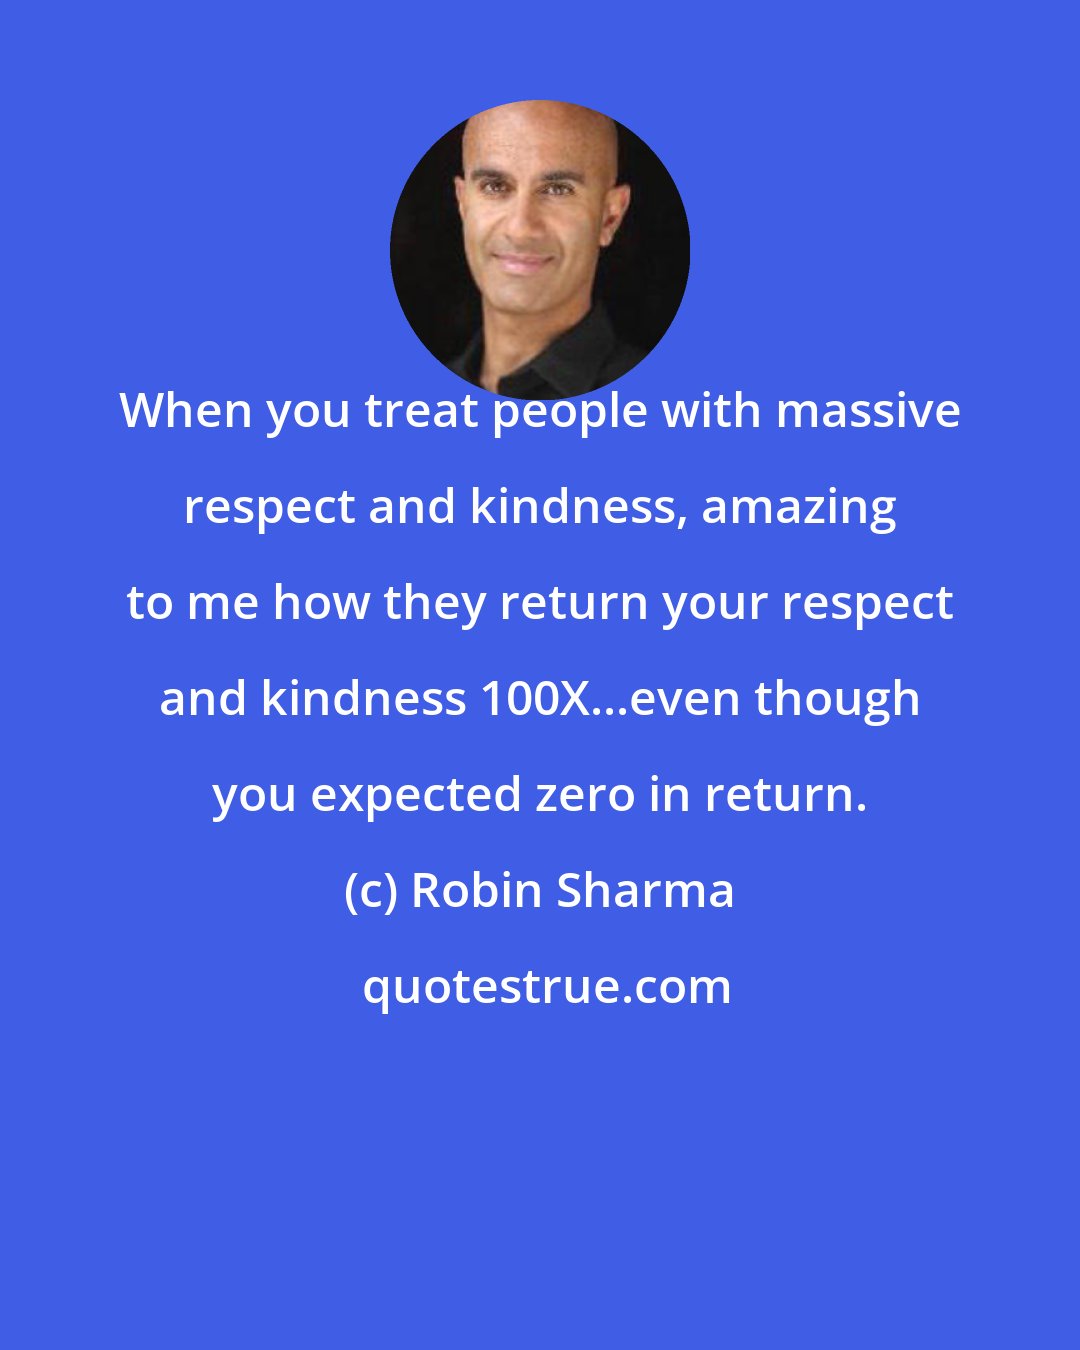 Robin Sharma: When you treat people with massive respect and kindness, amazing to me how they return your respect and kindness 100X...even though you expected zero in return.